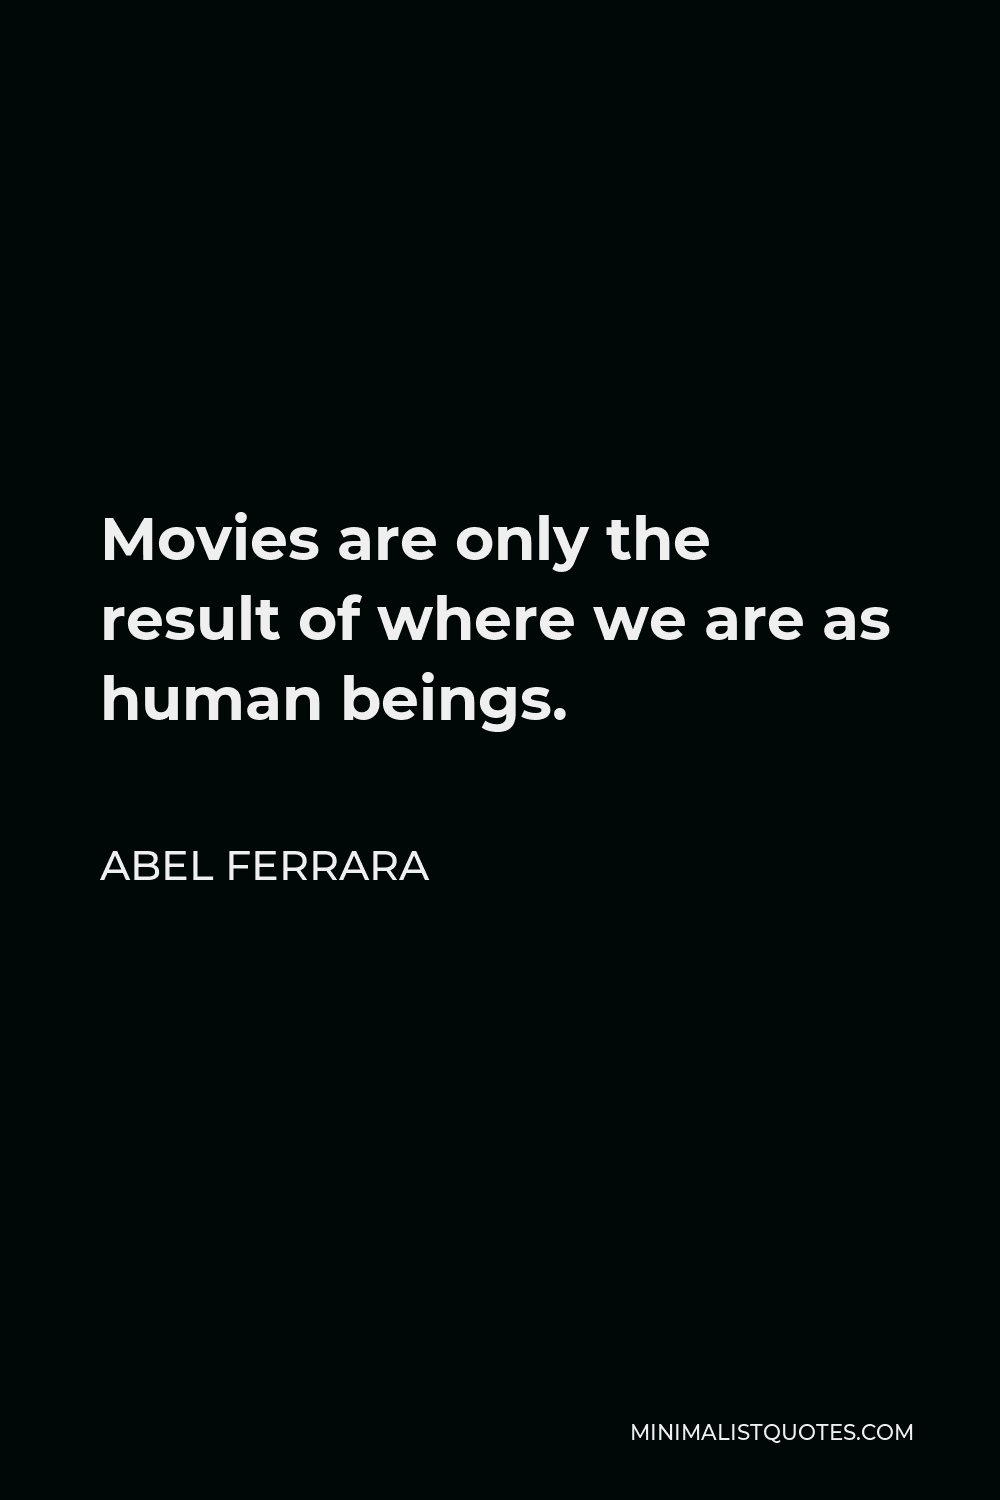 Abel Ferrara Quote - Movies are only the result of where we are as human beings.